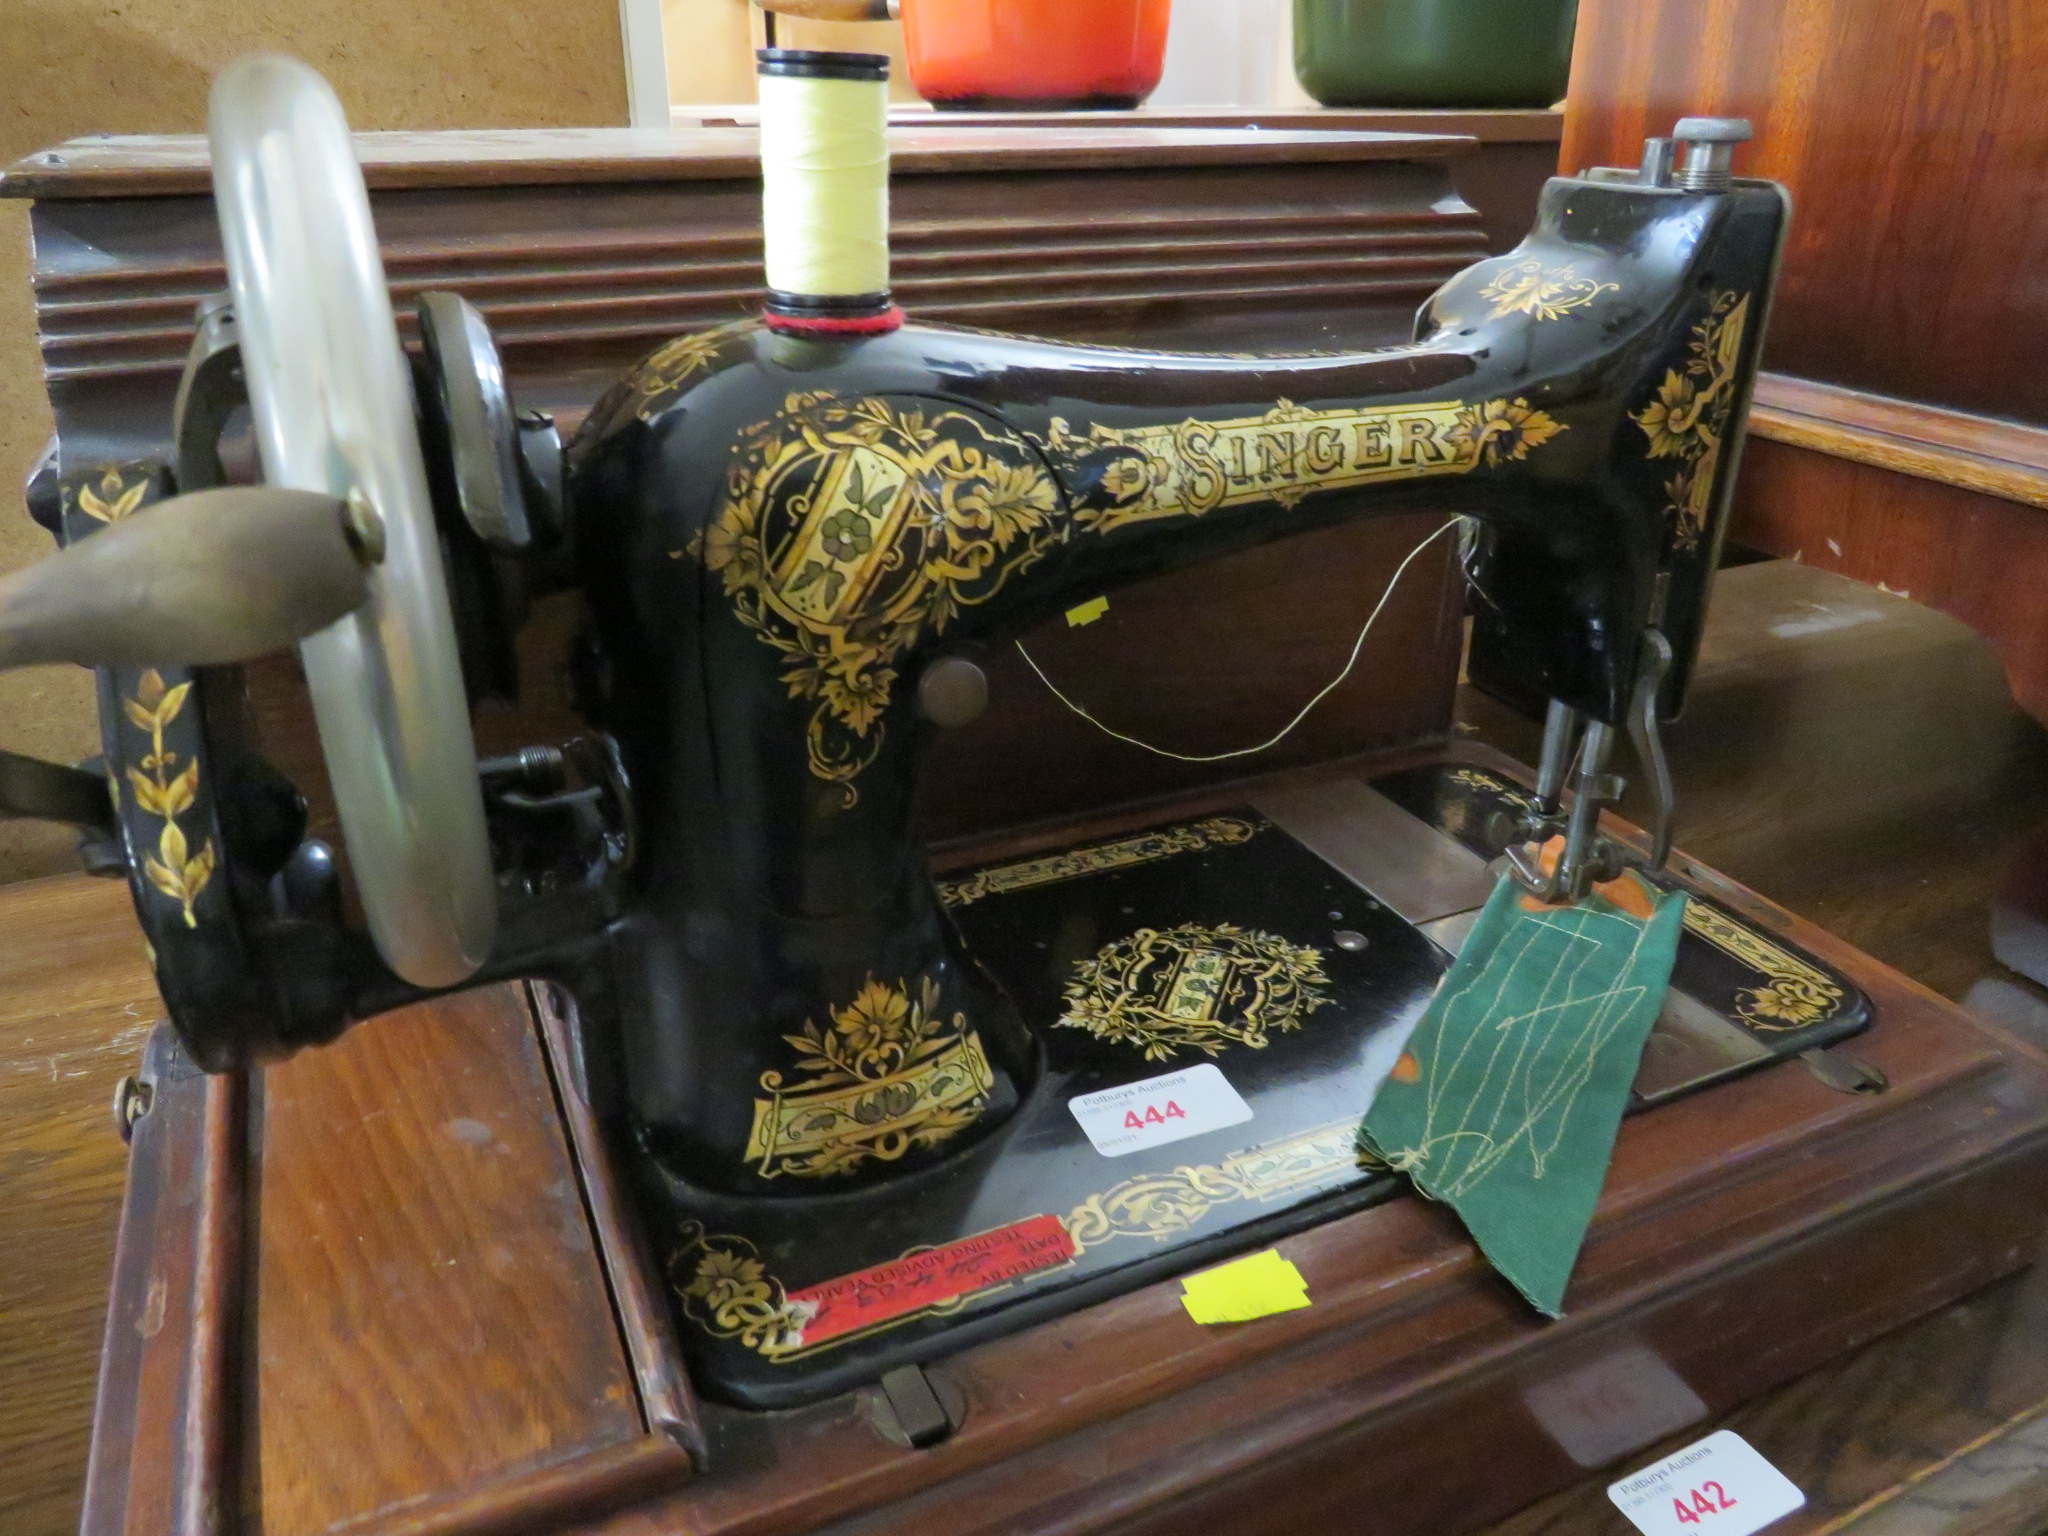 VINTAGE SINGER MANUAL SEWING MACHINE WITH MAHOGANY CASE